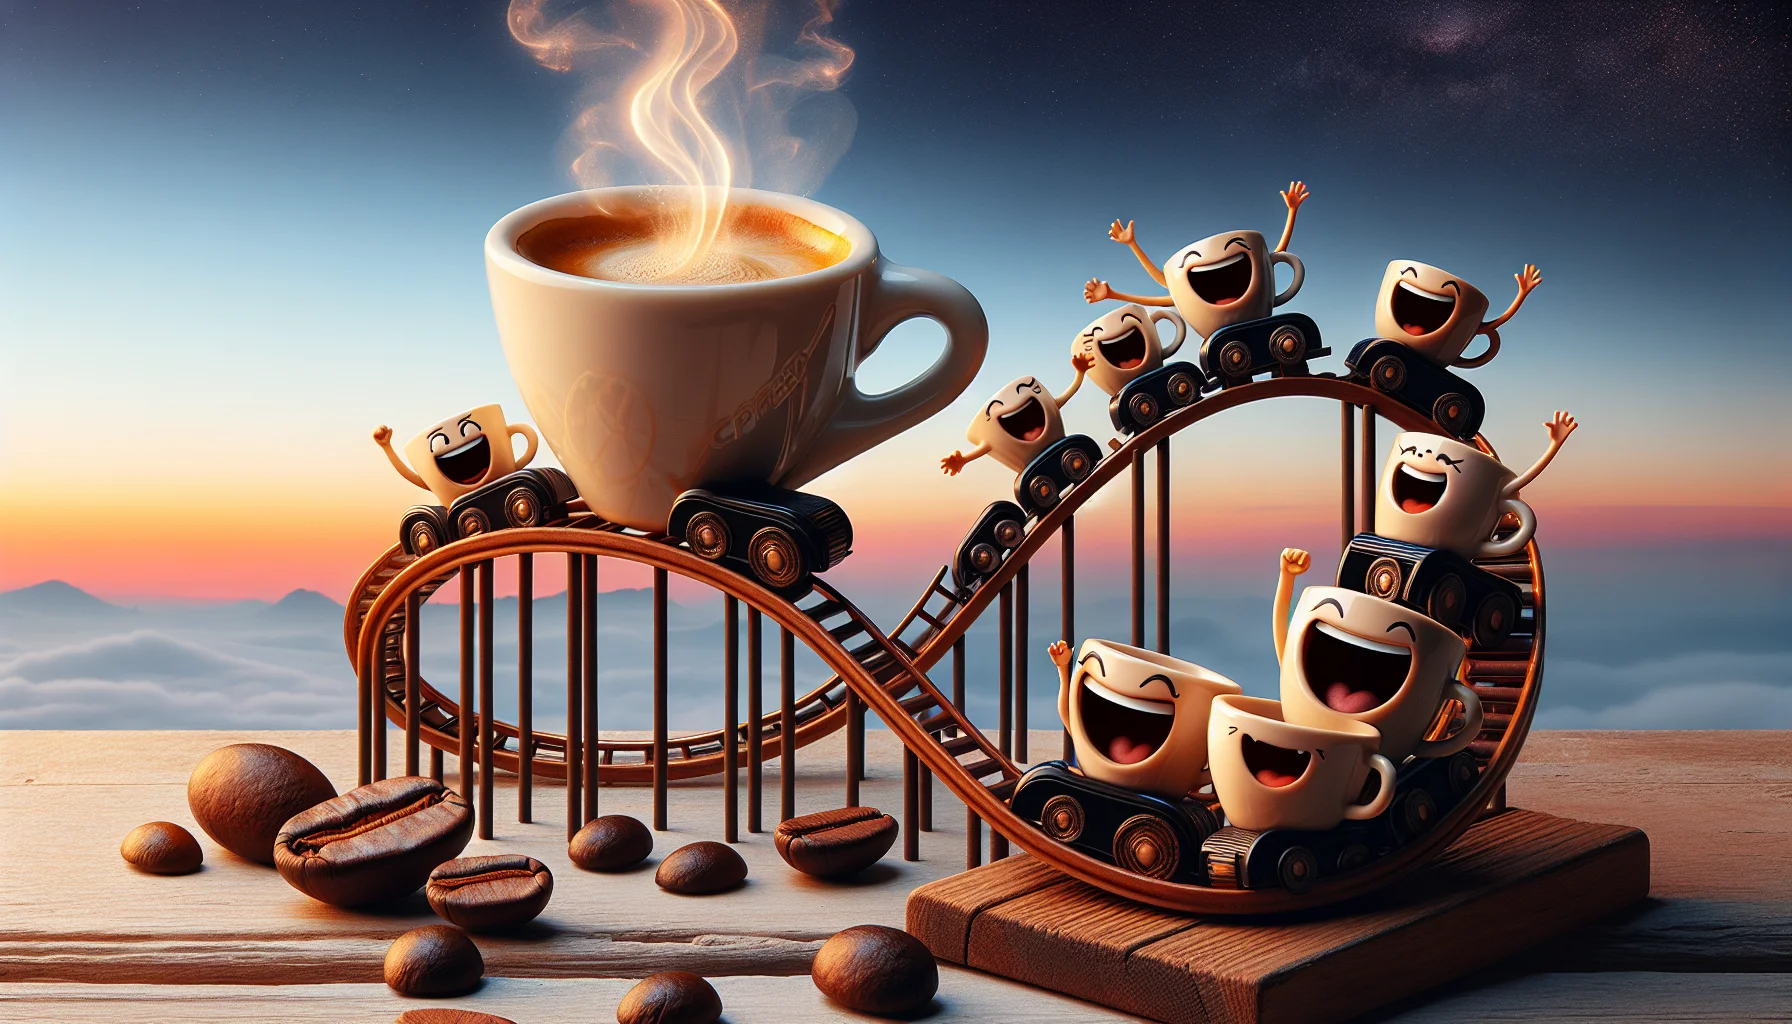 Design a whimsical and visually appealing scene, where espresso cups are the stars. The espresso cups are seen pendulating on a miniature roller-coaster, designed with elements that reflect the boldness of coffee beans and the steam of a fresh brew. Add in a surreal touch where the coffee cups laugh and cheer as if the thrilling ride is the biggest adventure of their lives. The entire scene is set against the backdrop of a dawn sky, indicating the perfect time for a refreshing espresso, thereby enticing viewers to enjoy a cup of coffee.